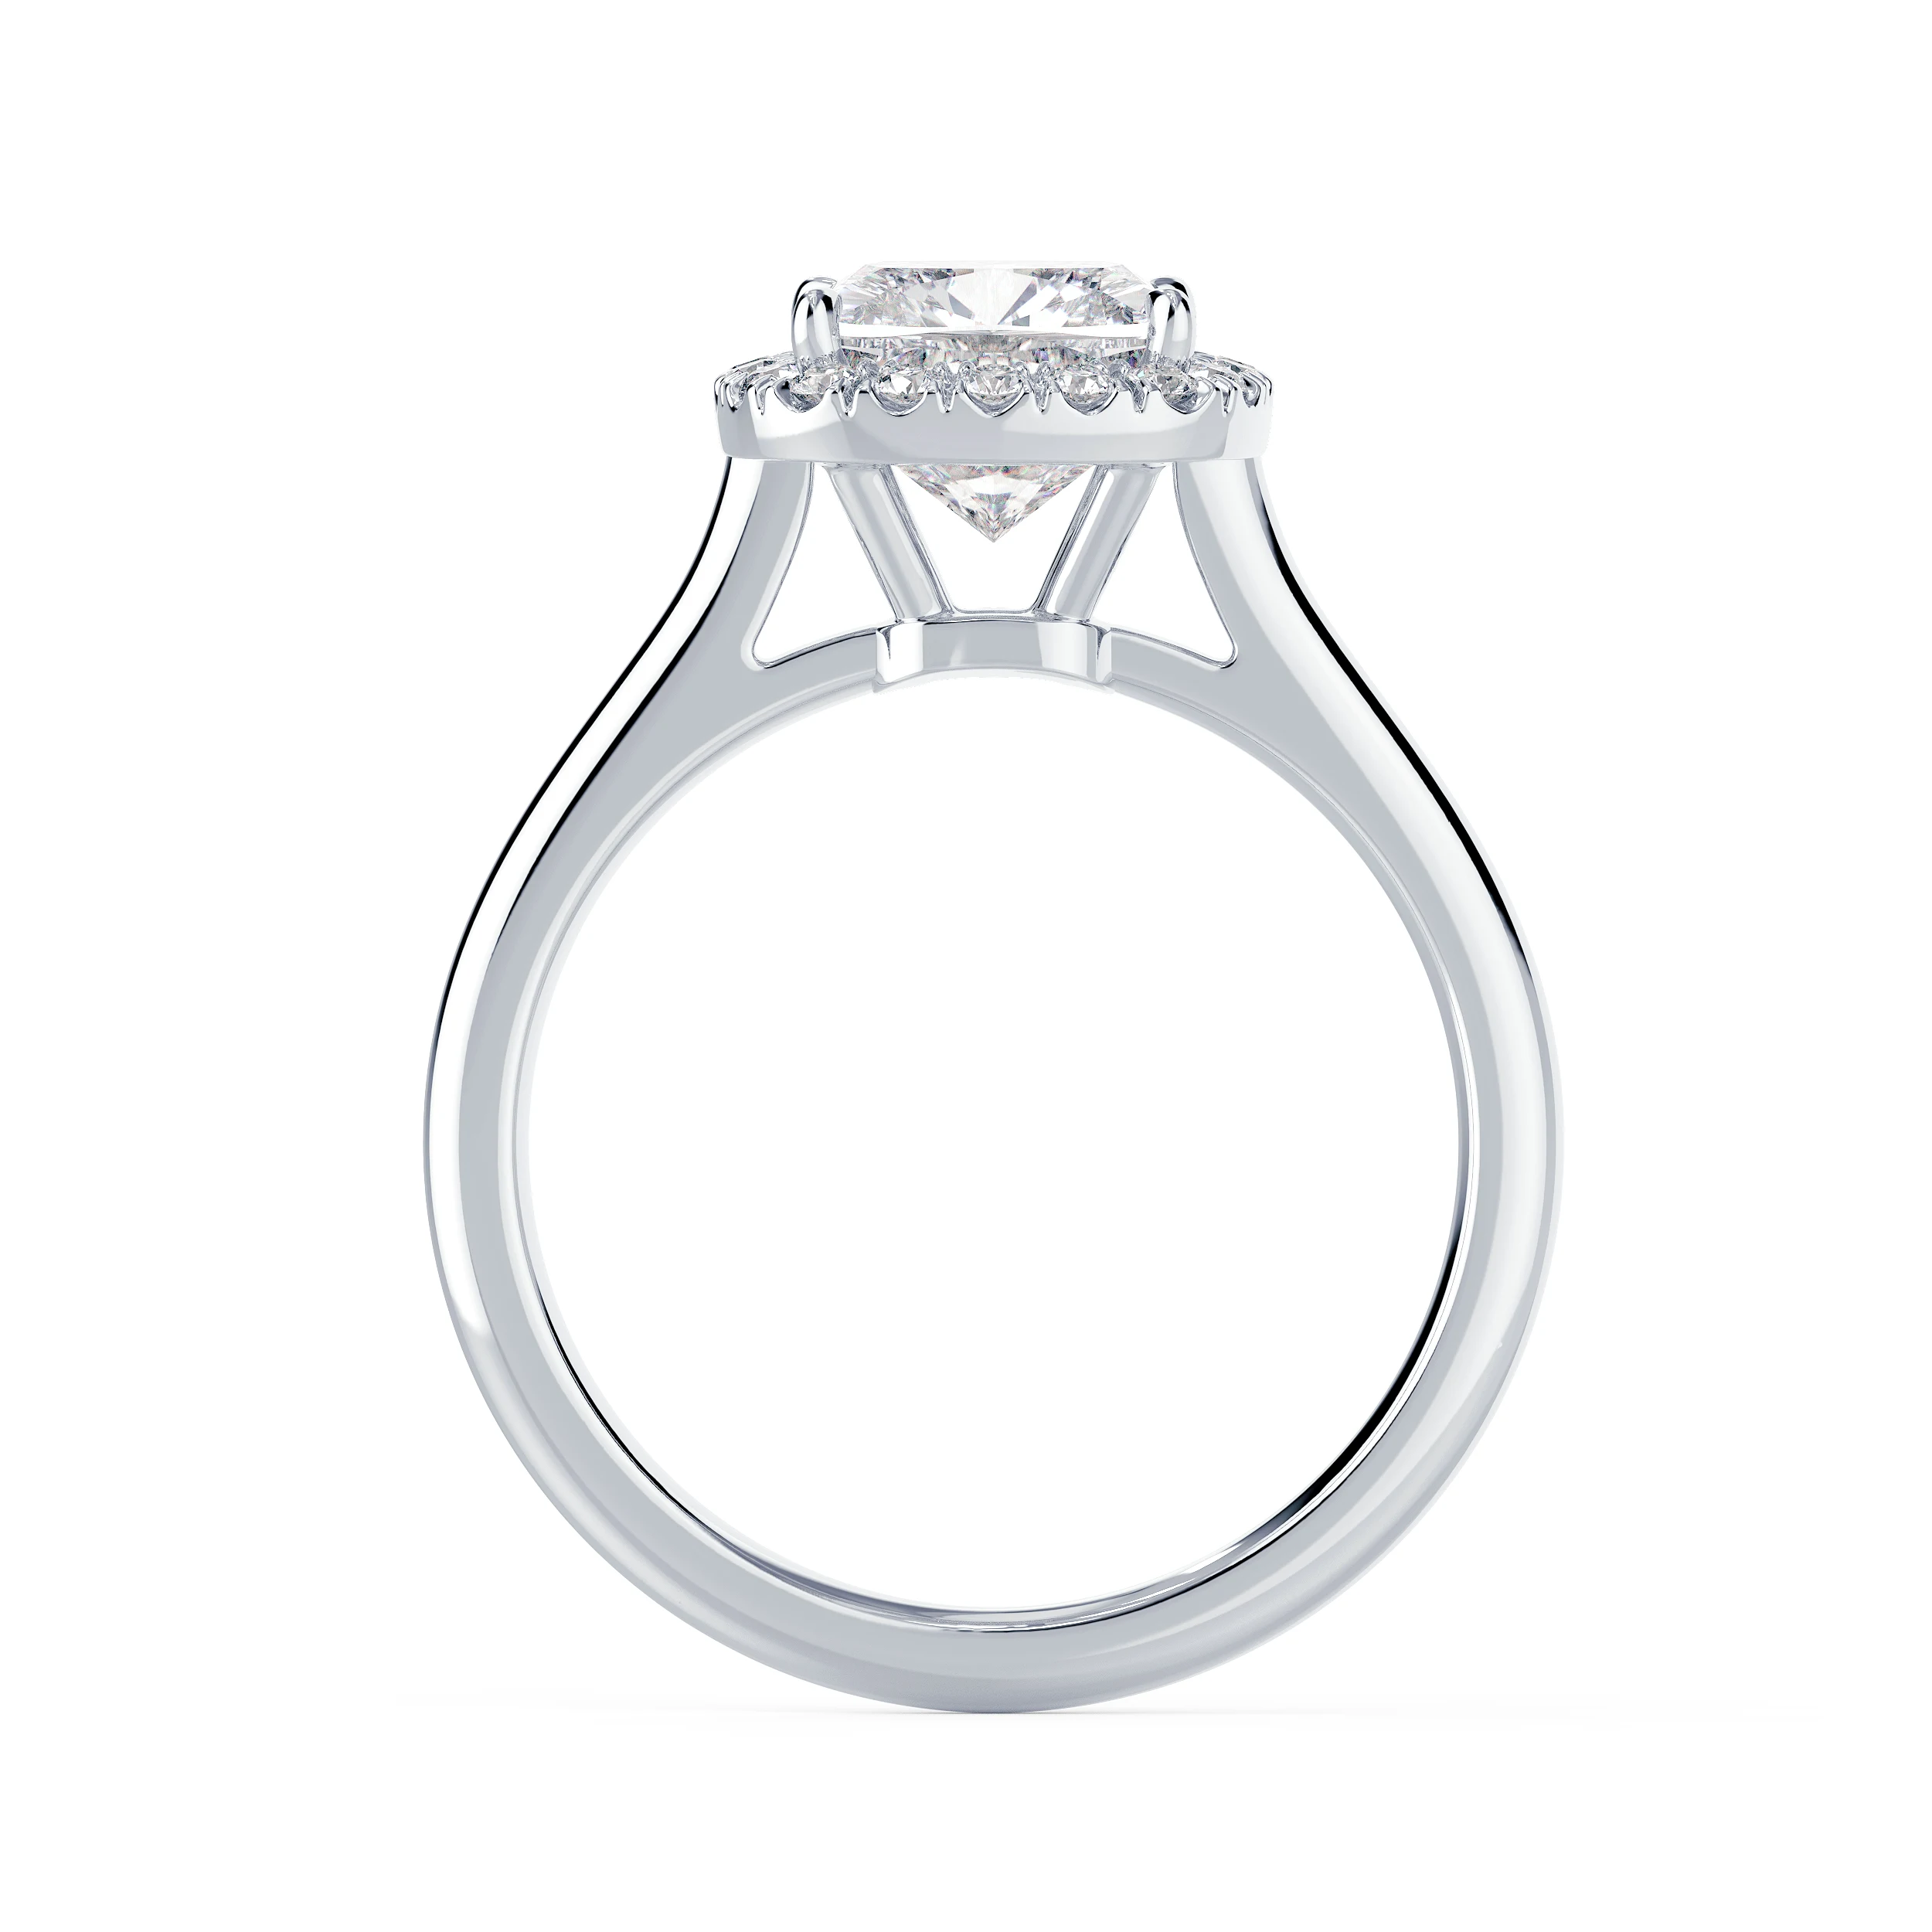 White Gold Cushion Single Halo Setting featuring Exceptional Quality Lab Diamonds (Profile View)